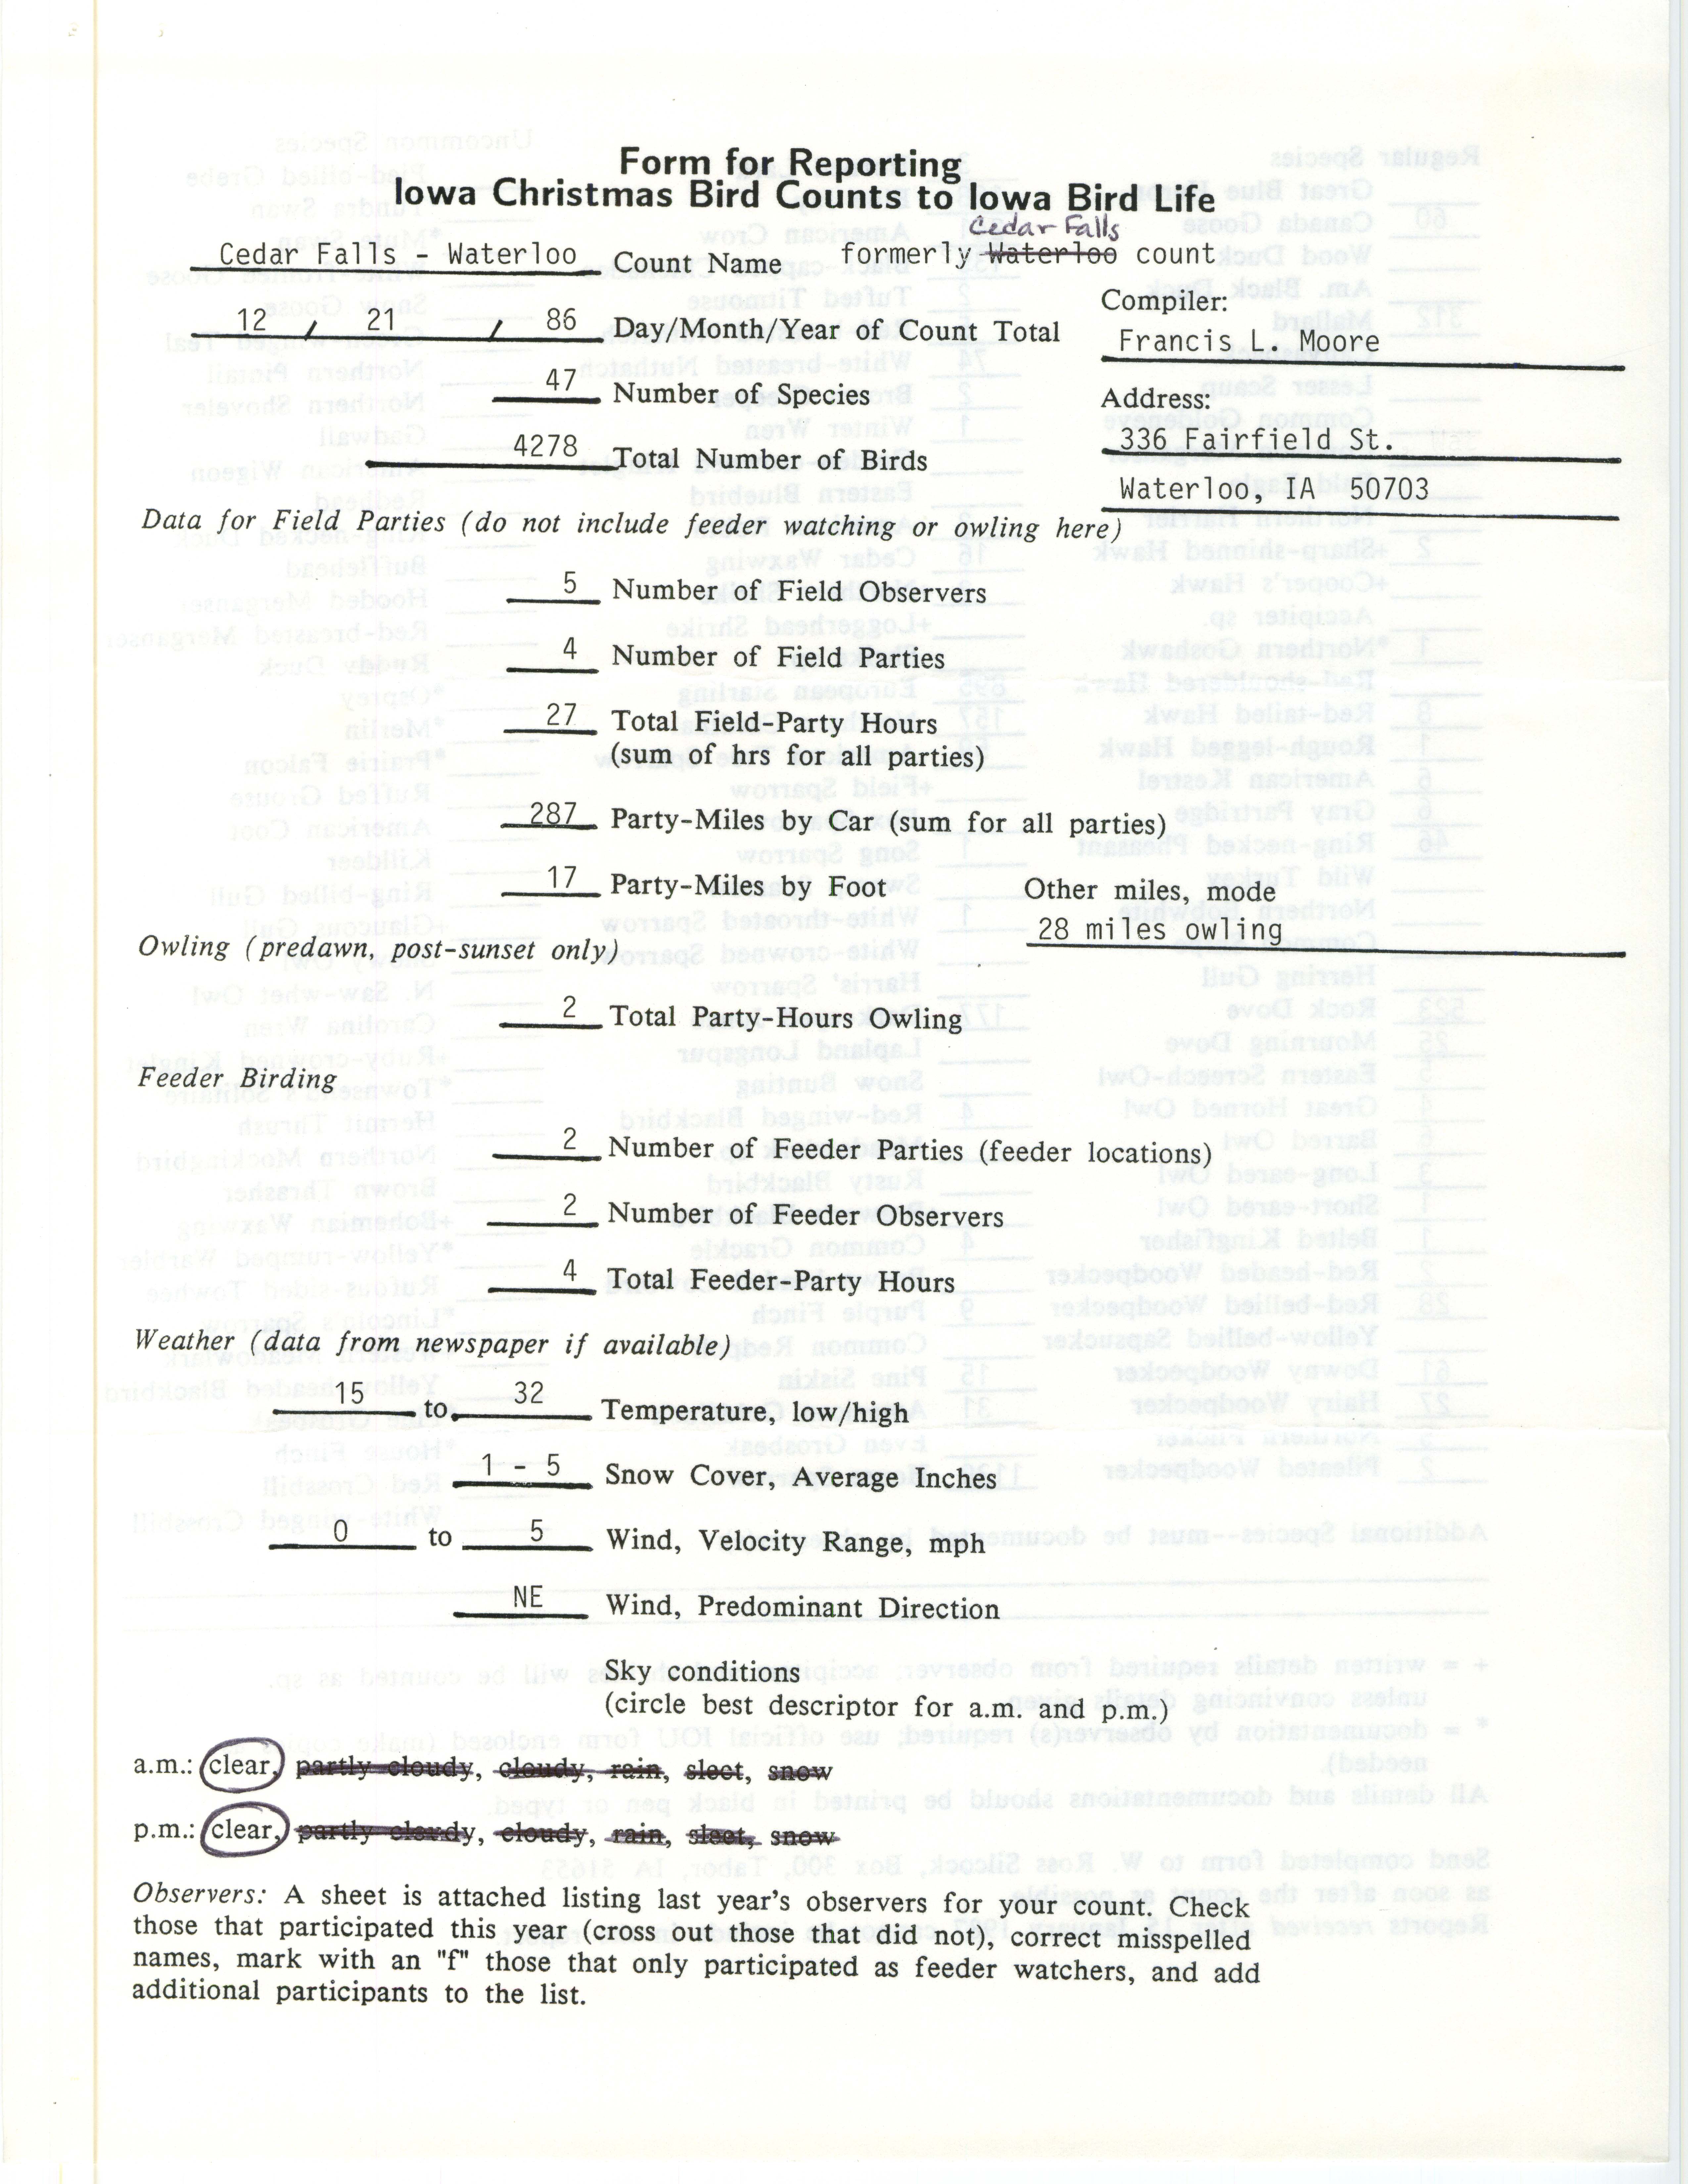 Form for reporting Iowa Christmas bird counts to Iowa Bird Life, Francis L. Moore, December 21, 1986